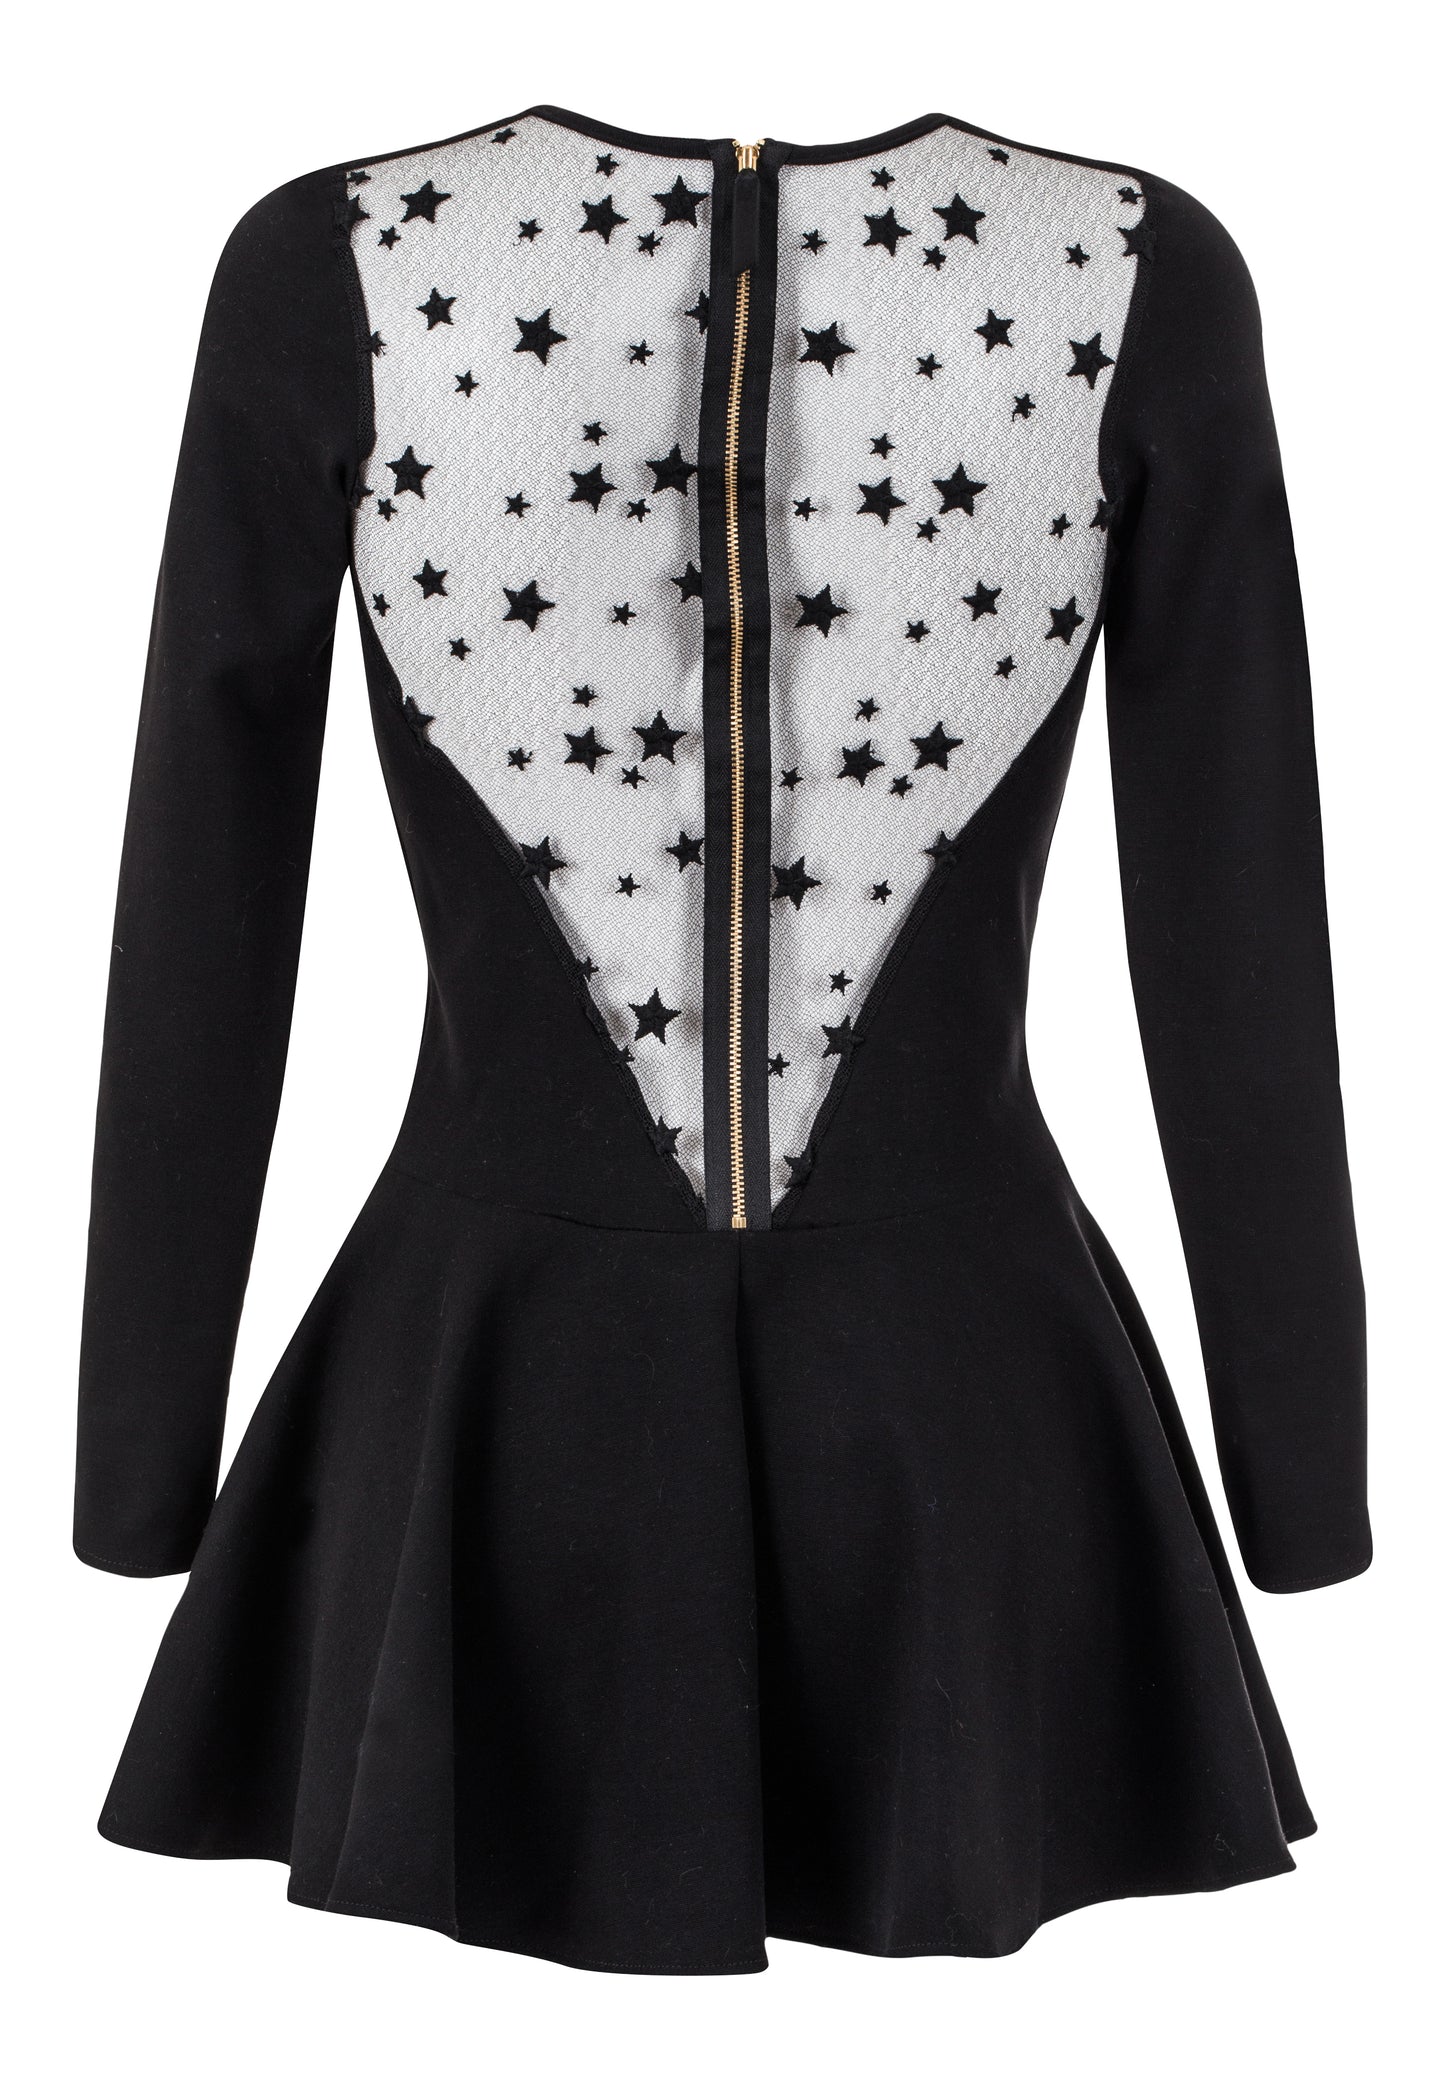 Robe patineuse - Stairway to heaven - Maud et Marjorie Lingerie